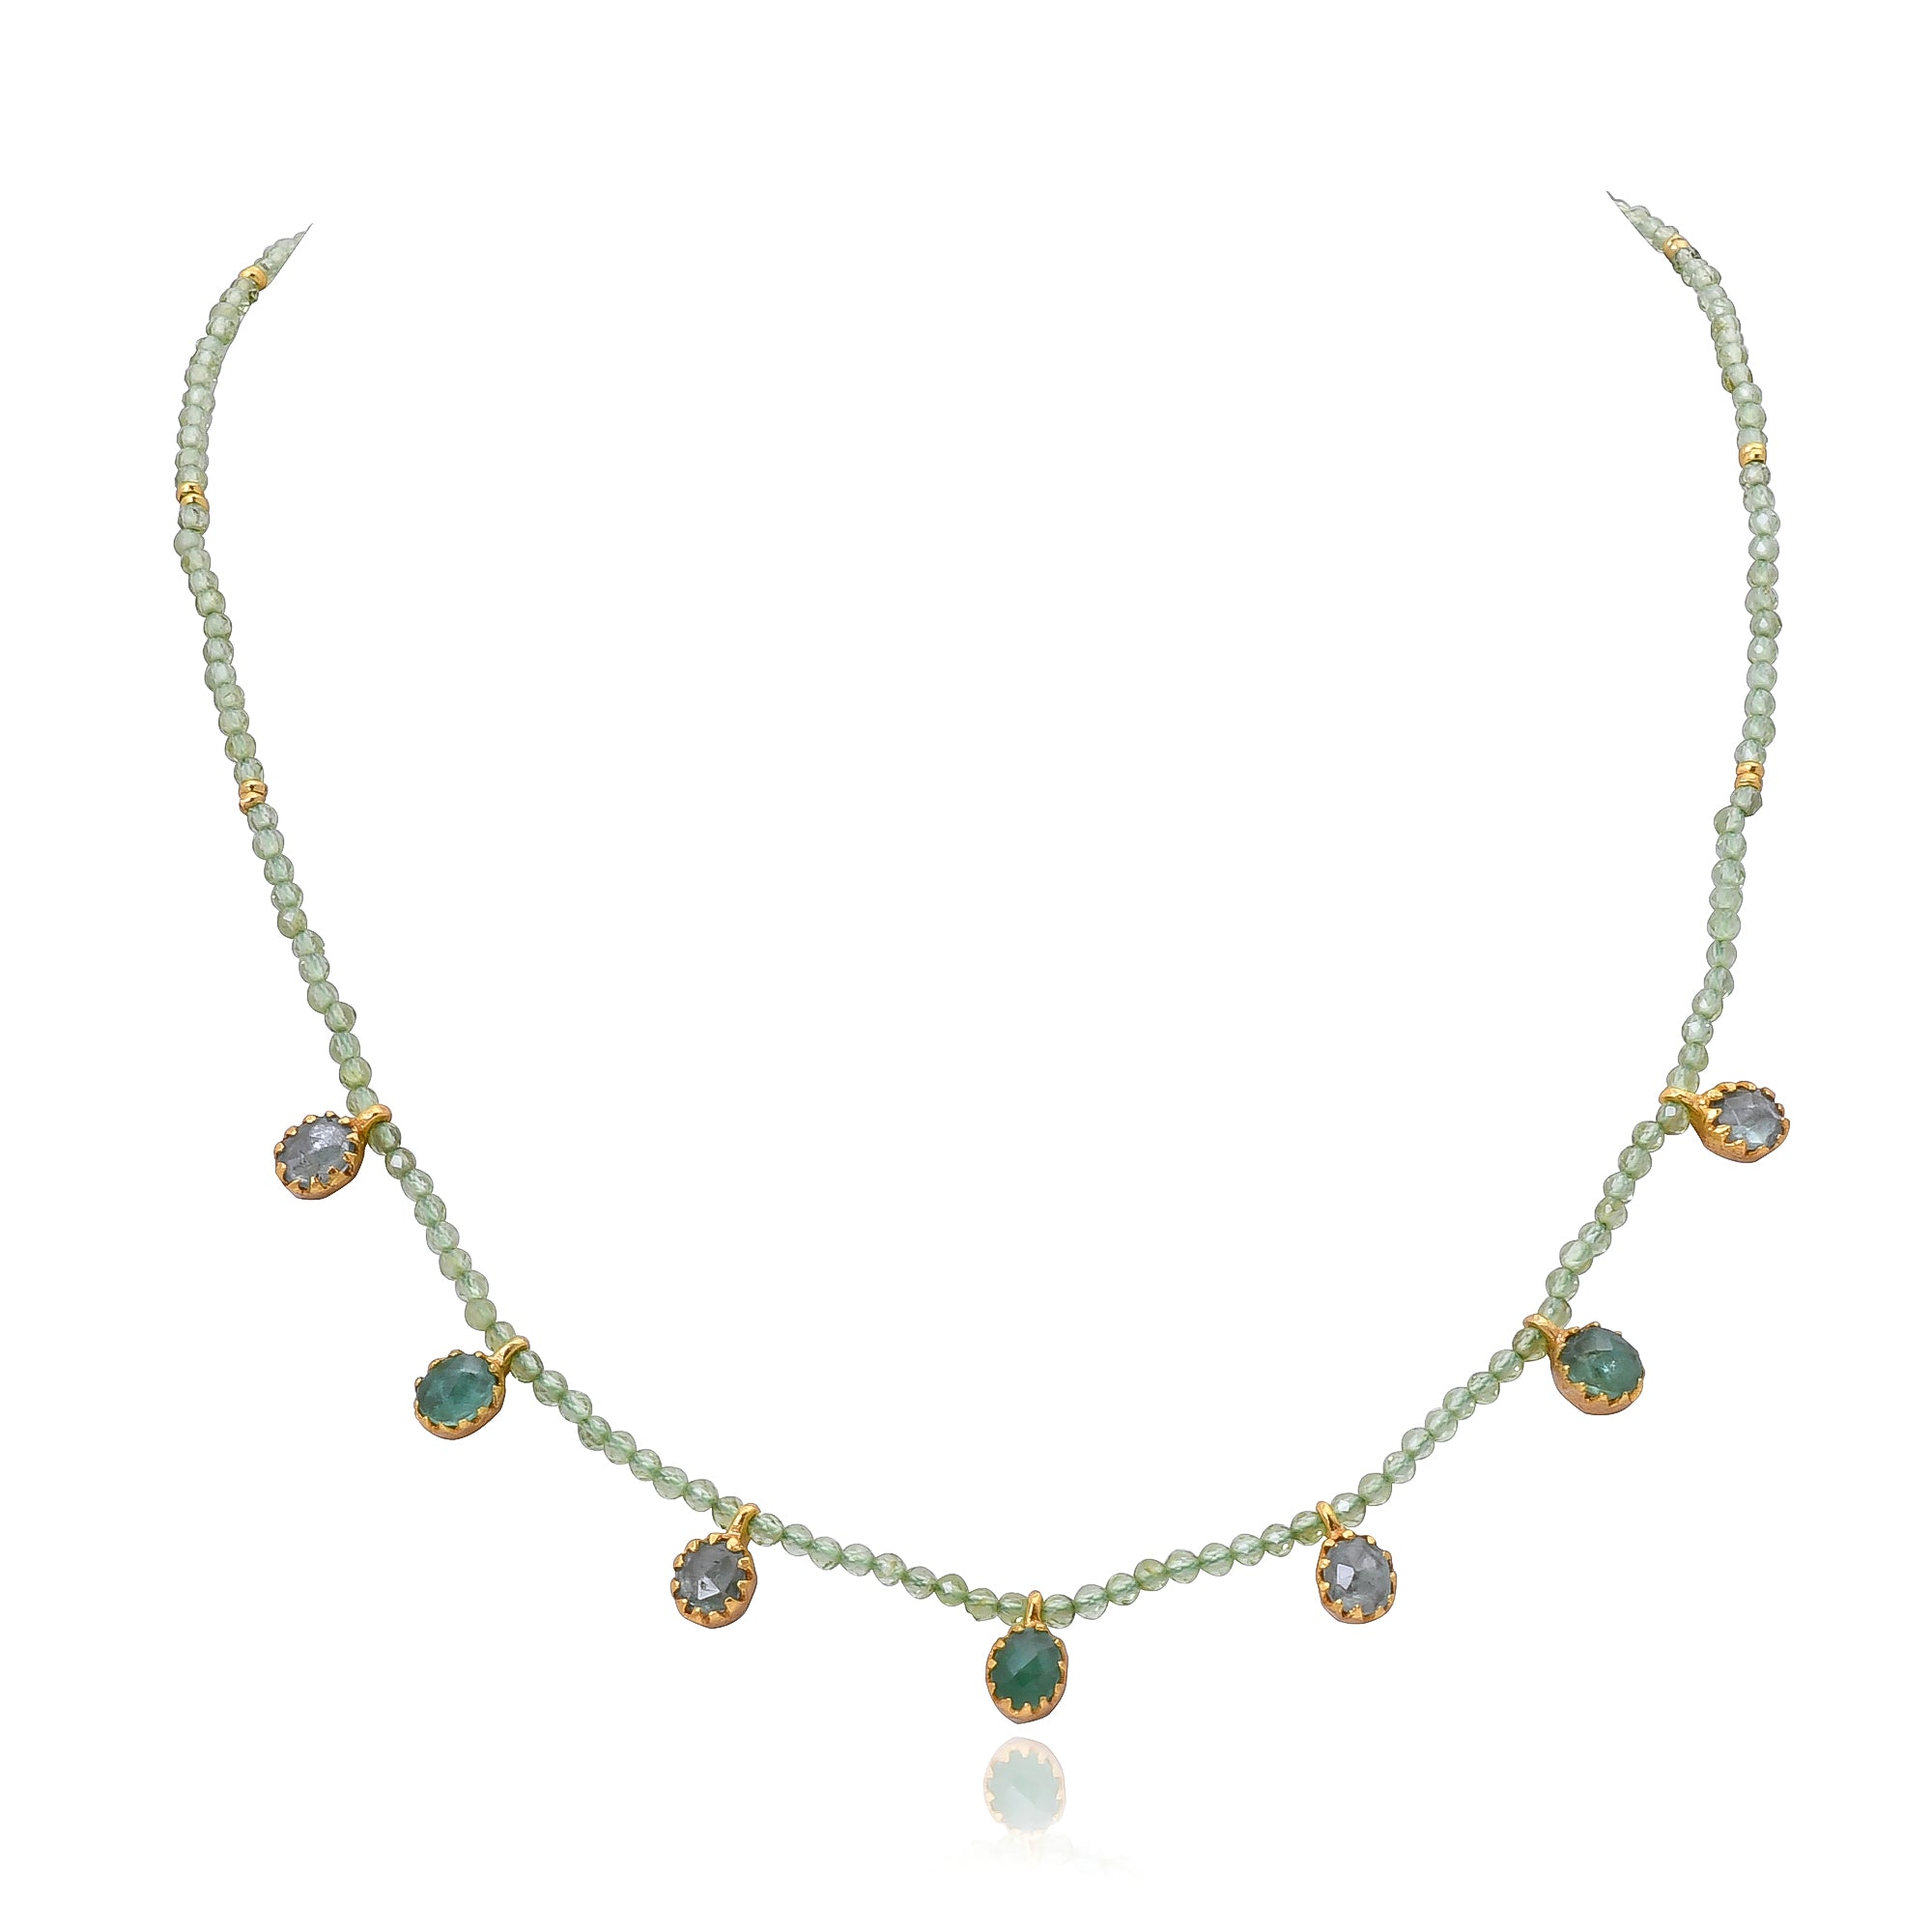 Silver Gold Plated Peridot and Kyanite Necklace